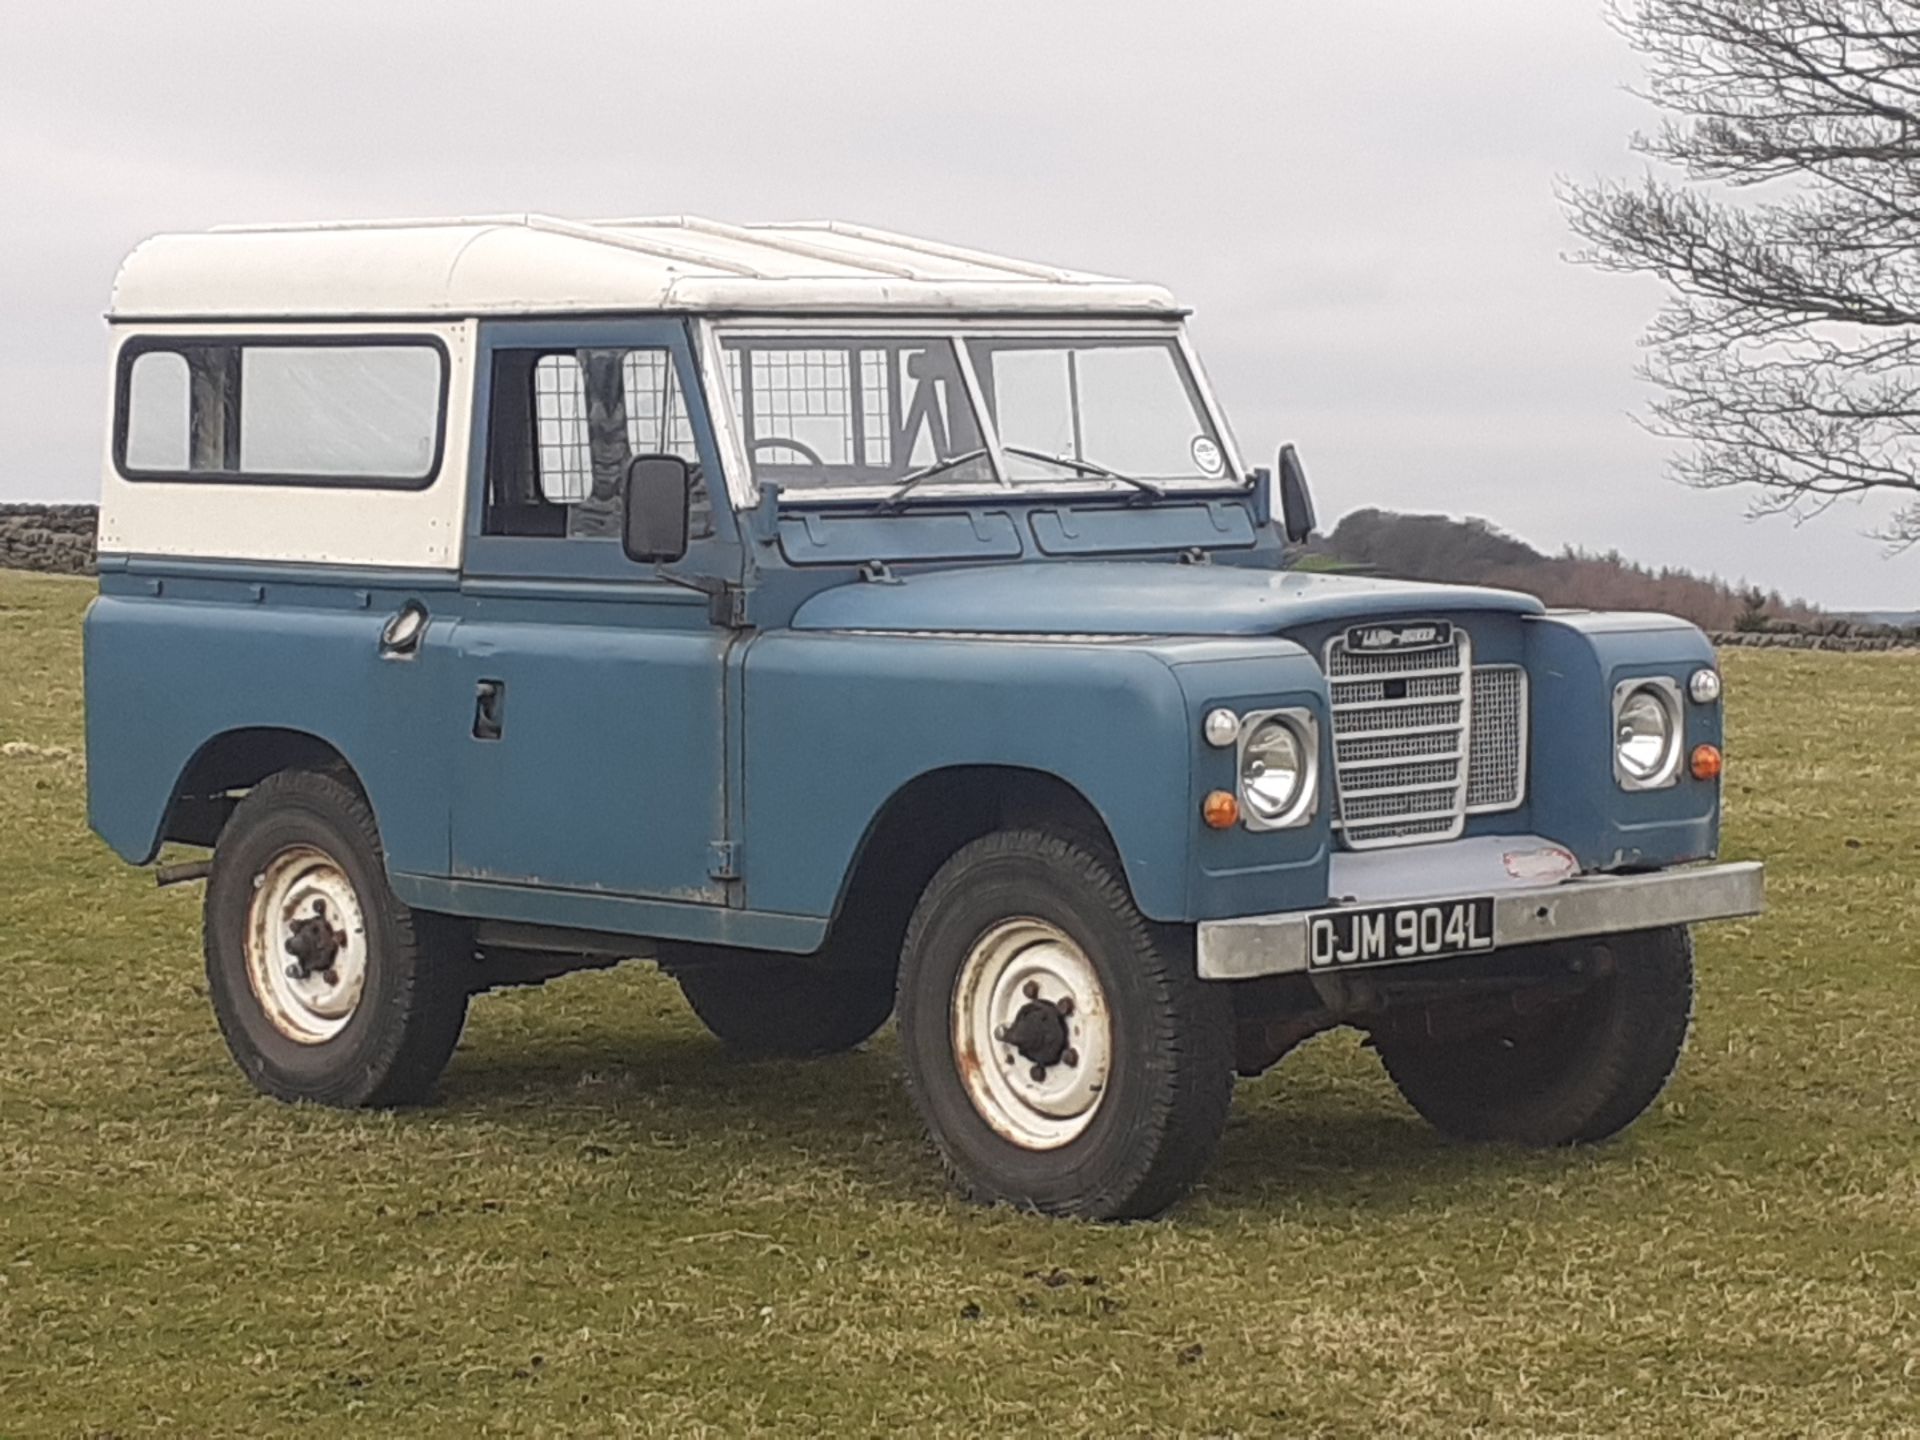 1972 LAND ROVER 88" - 4 CYL 2.5 DIESEL NATURALLY ASPIRATED, DRIVES AS IT SHOULD, WONDERFUL PATINA